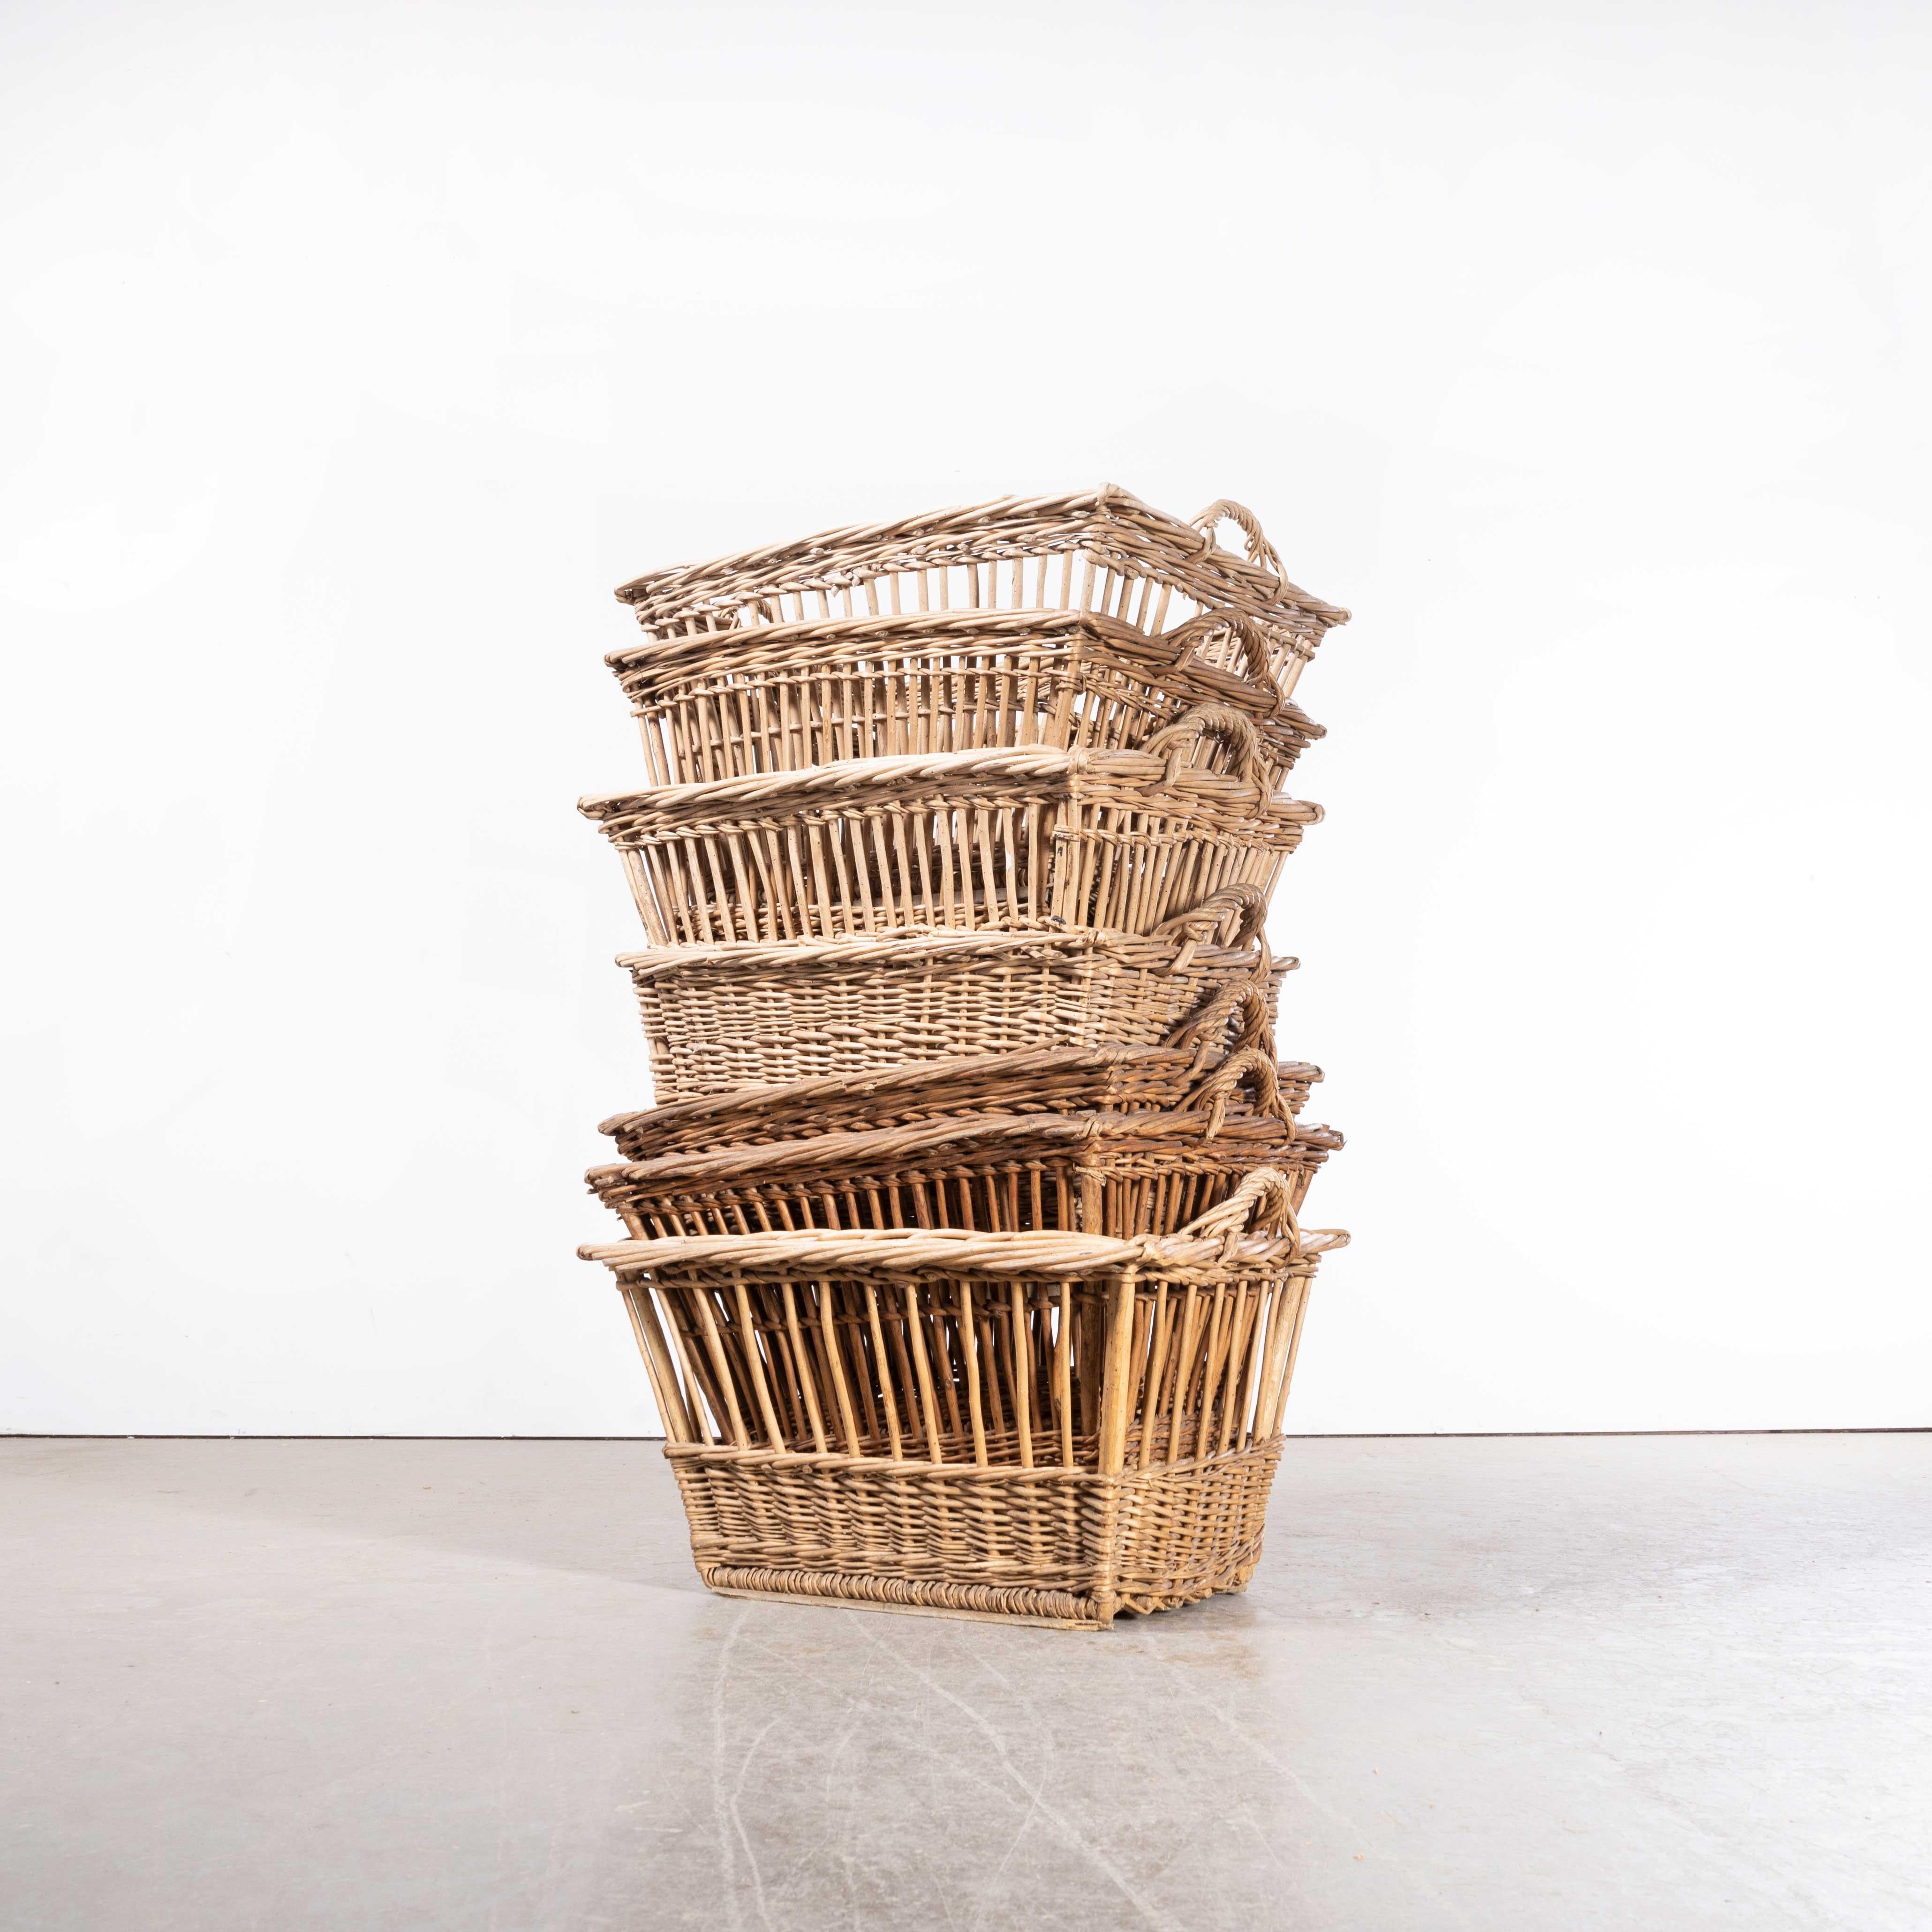 Original French Handmade Willow Baskets
Original French Handmade Willow Baskets. Good honest French baskets, we have a number available. Approximate size 70cm long, 43cm high and 57cm wide.

WORKSHOP REPORT
Our workshop team inspect every product